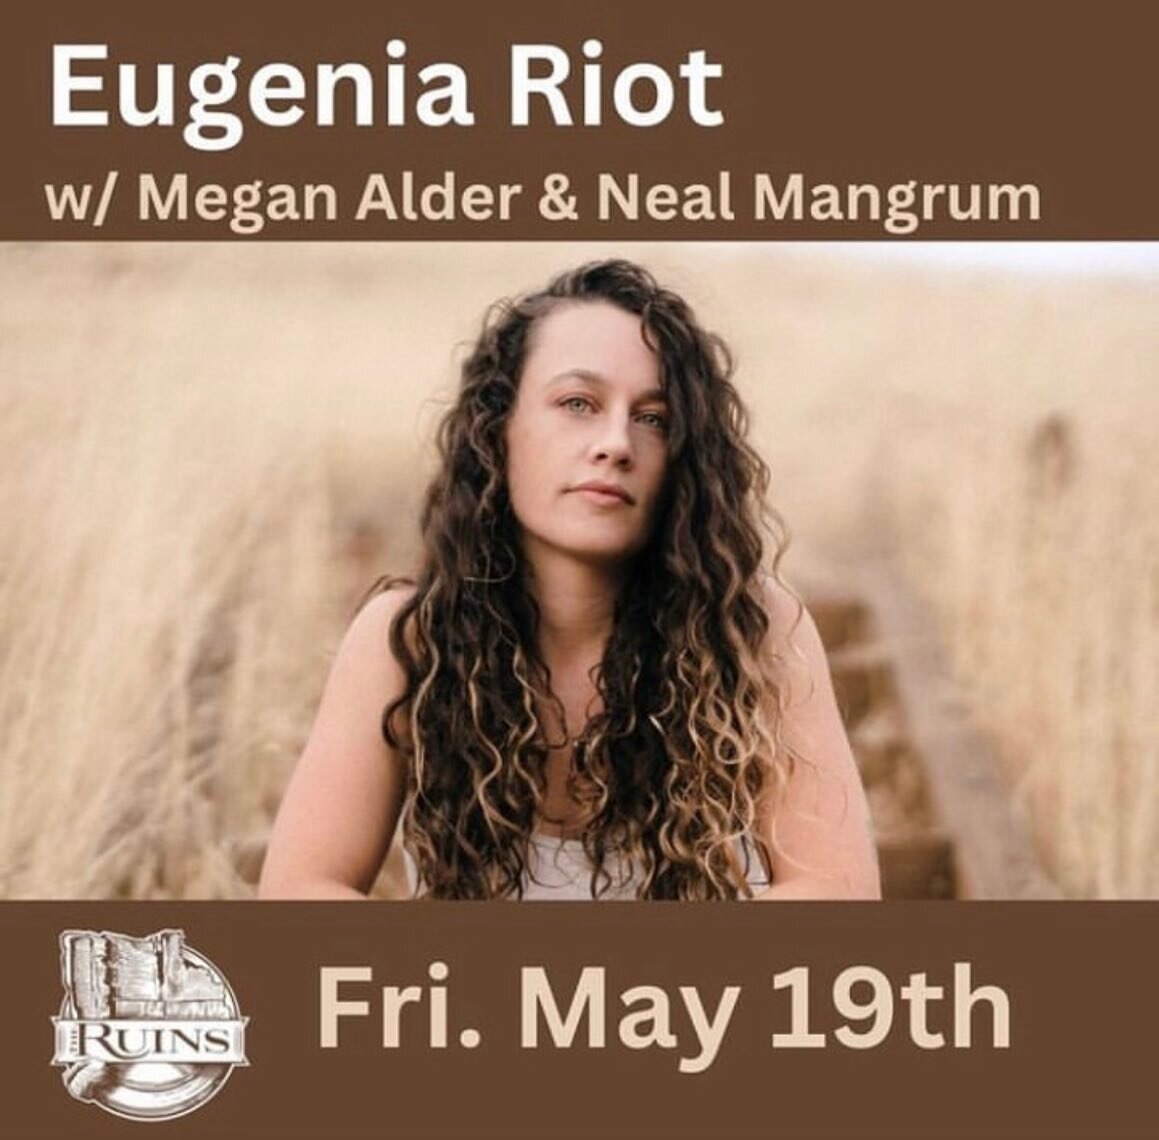 TOMORROW IN HOOD RIVER! Excited to bring the album release caravan to @eventsattheruins - this is an outdoor, all ages show. @maldermusic &amp; Neil Mangrum get things started at 6pm, then Eugenia Riot plays until 9! 🌞🍷